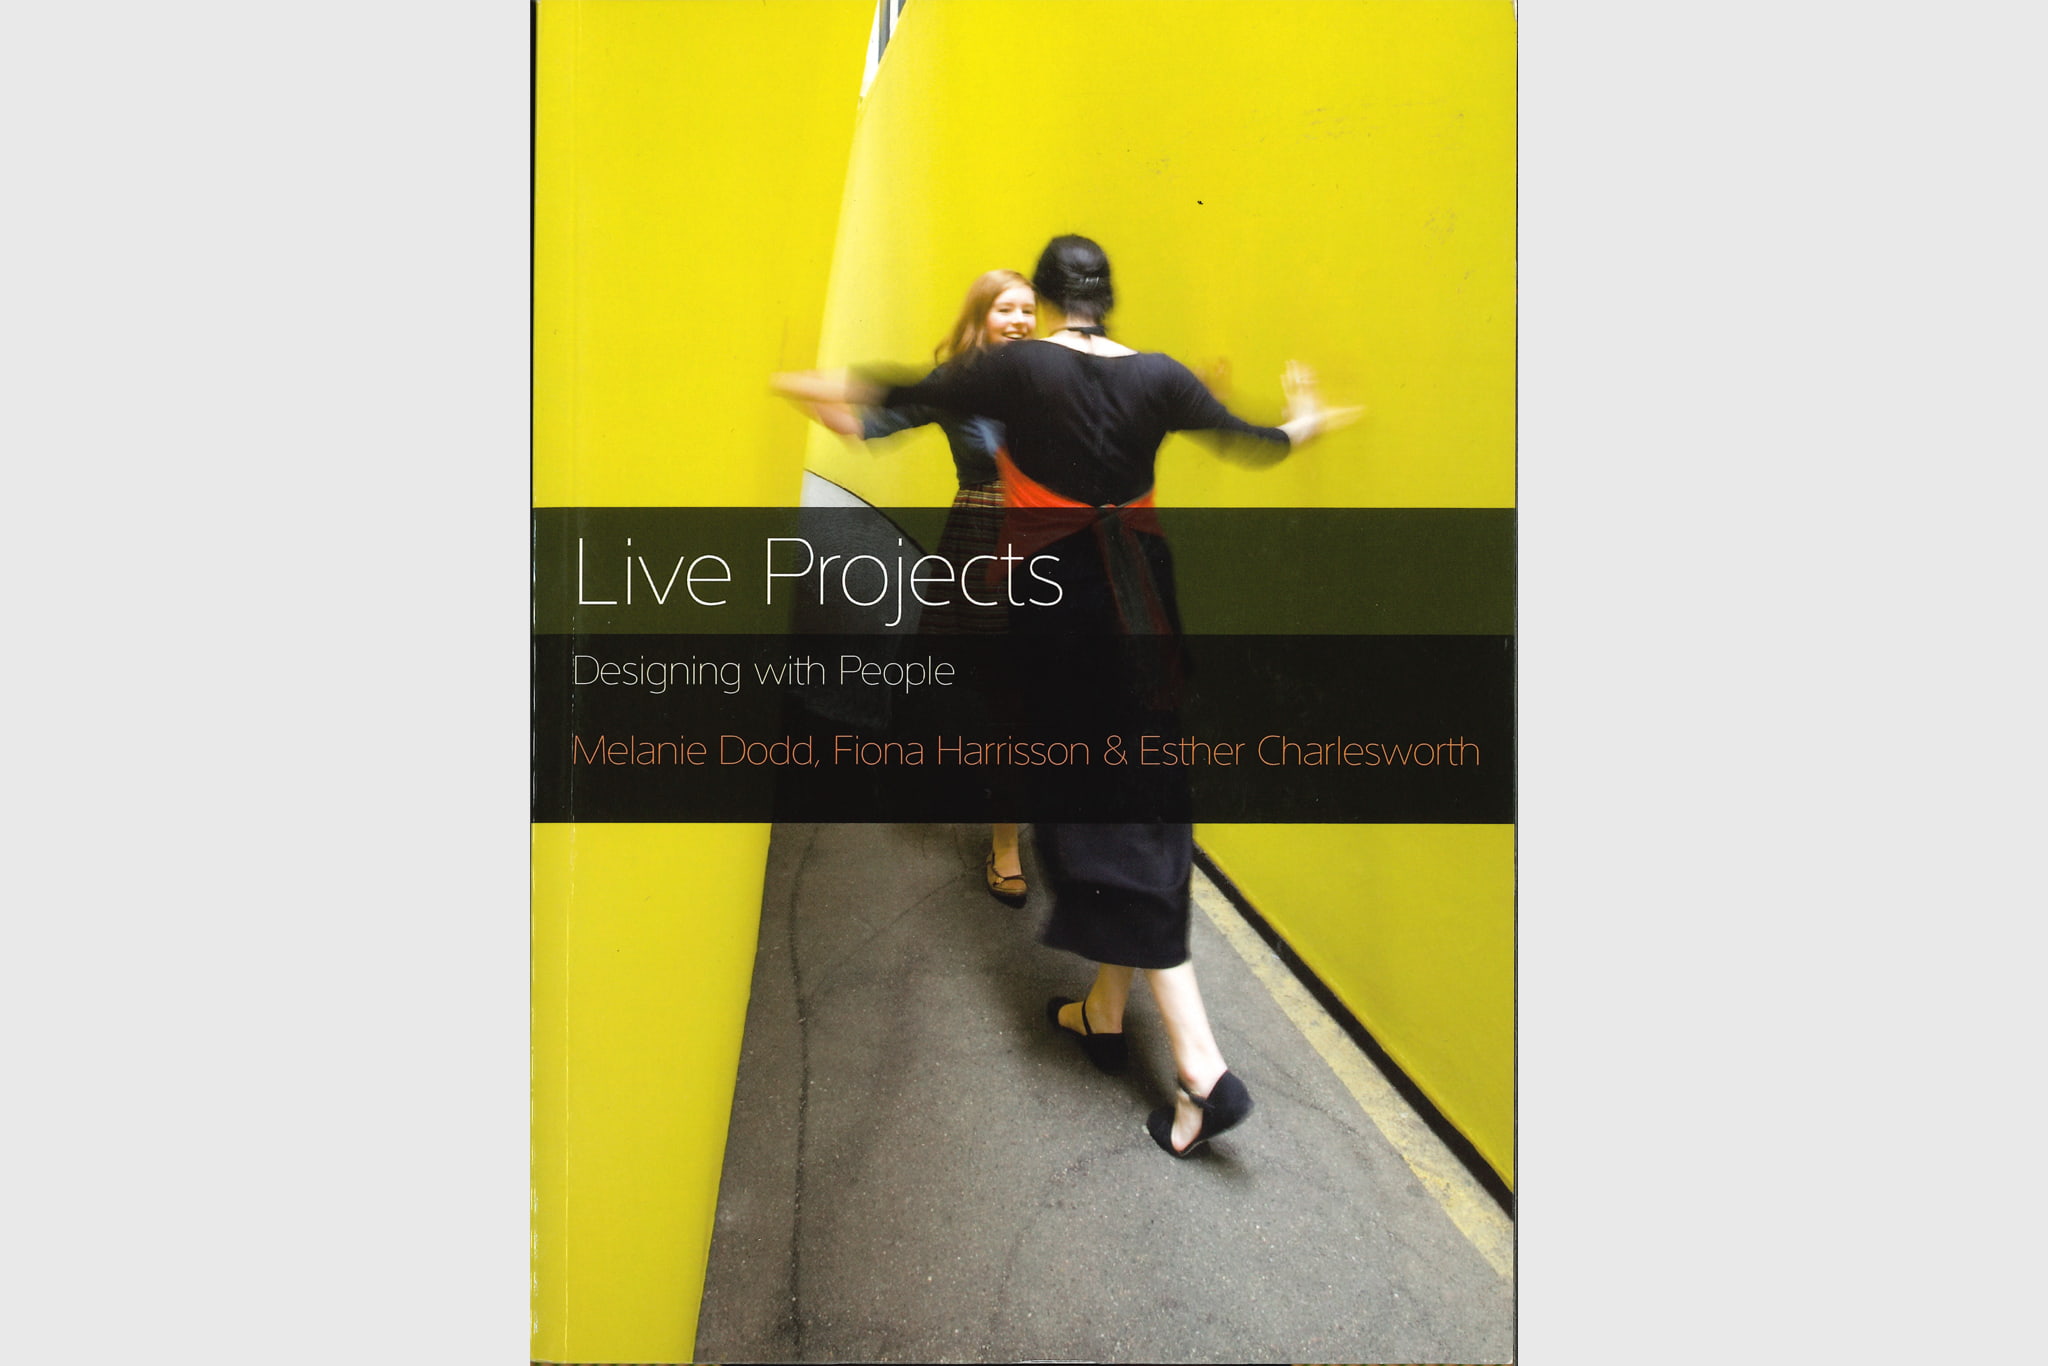 Live projects book cover